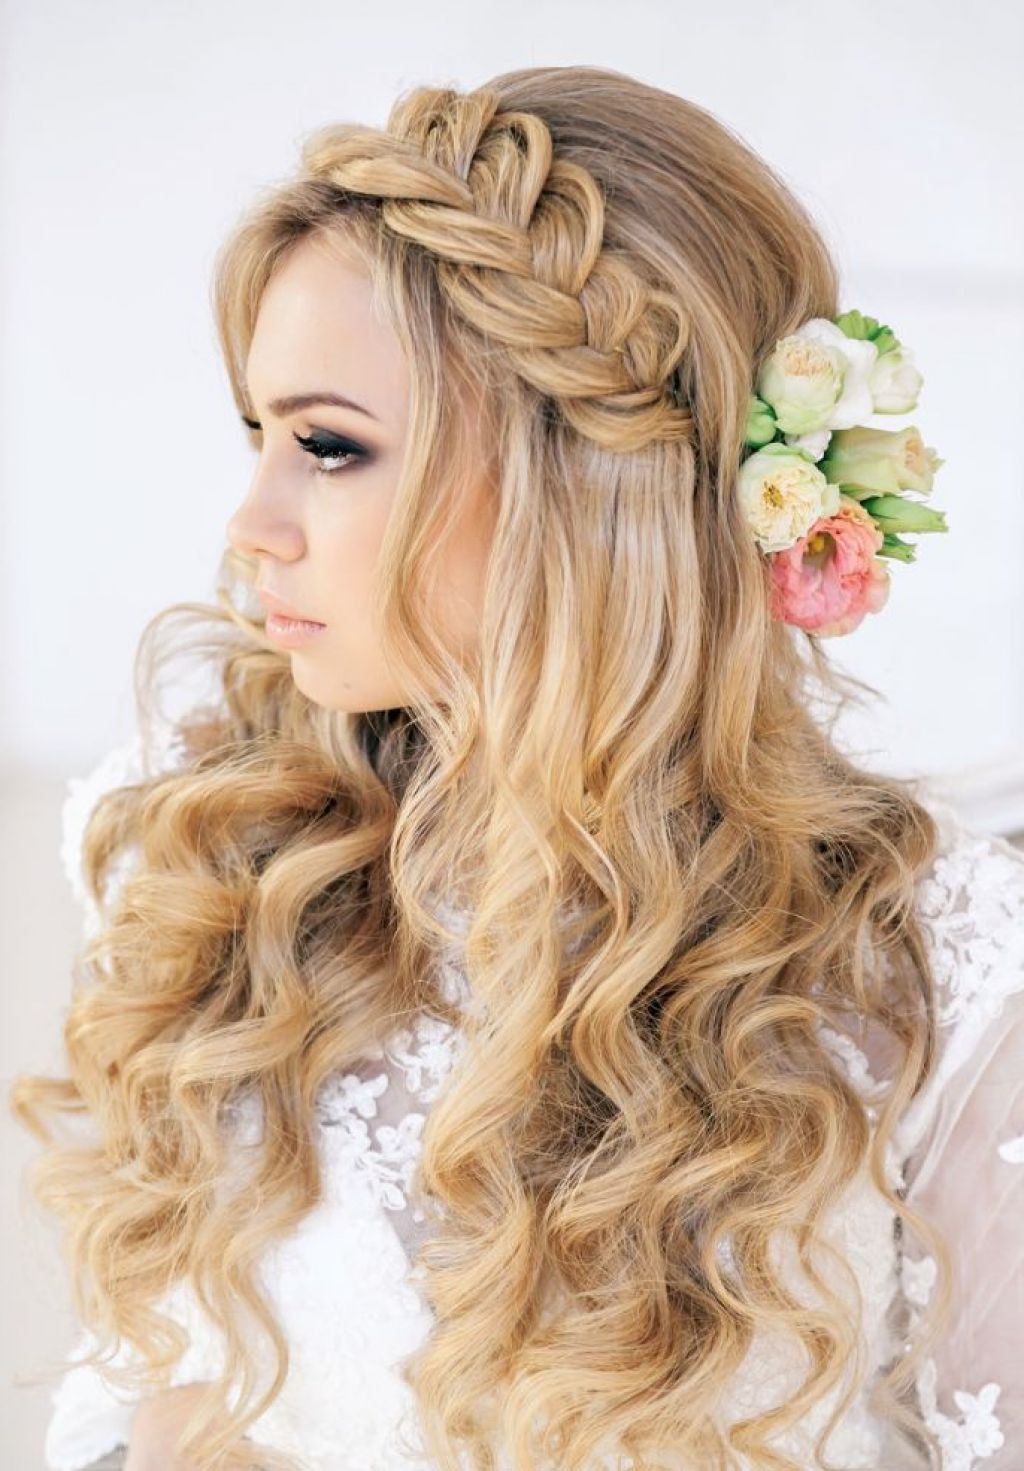 Elegant Prom Hairstyles
 65 Prom Hairstyles That plement Your Beauty Fave